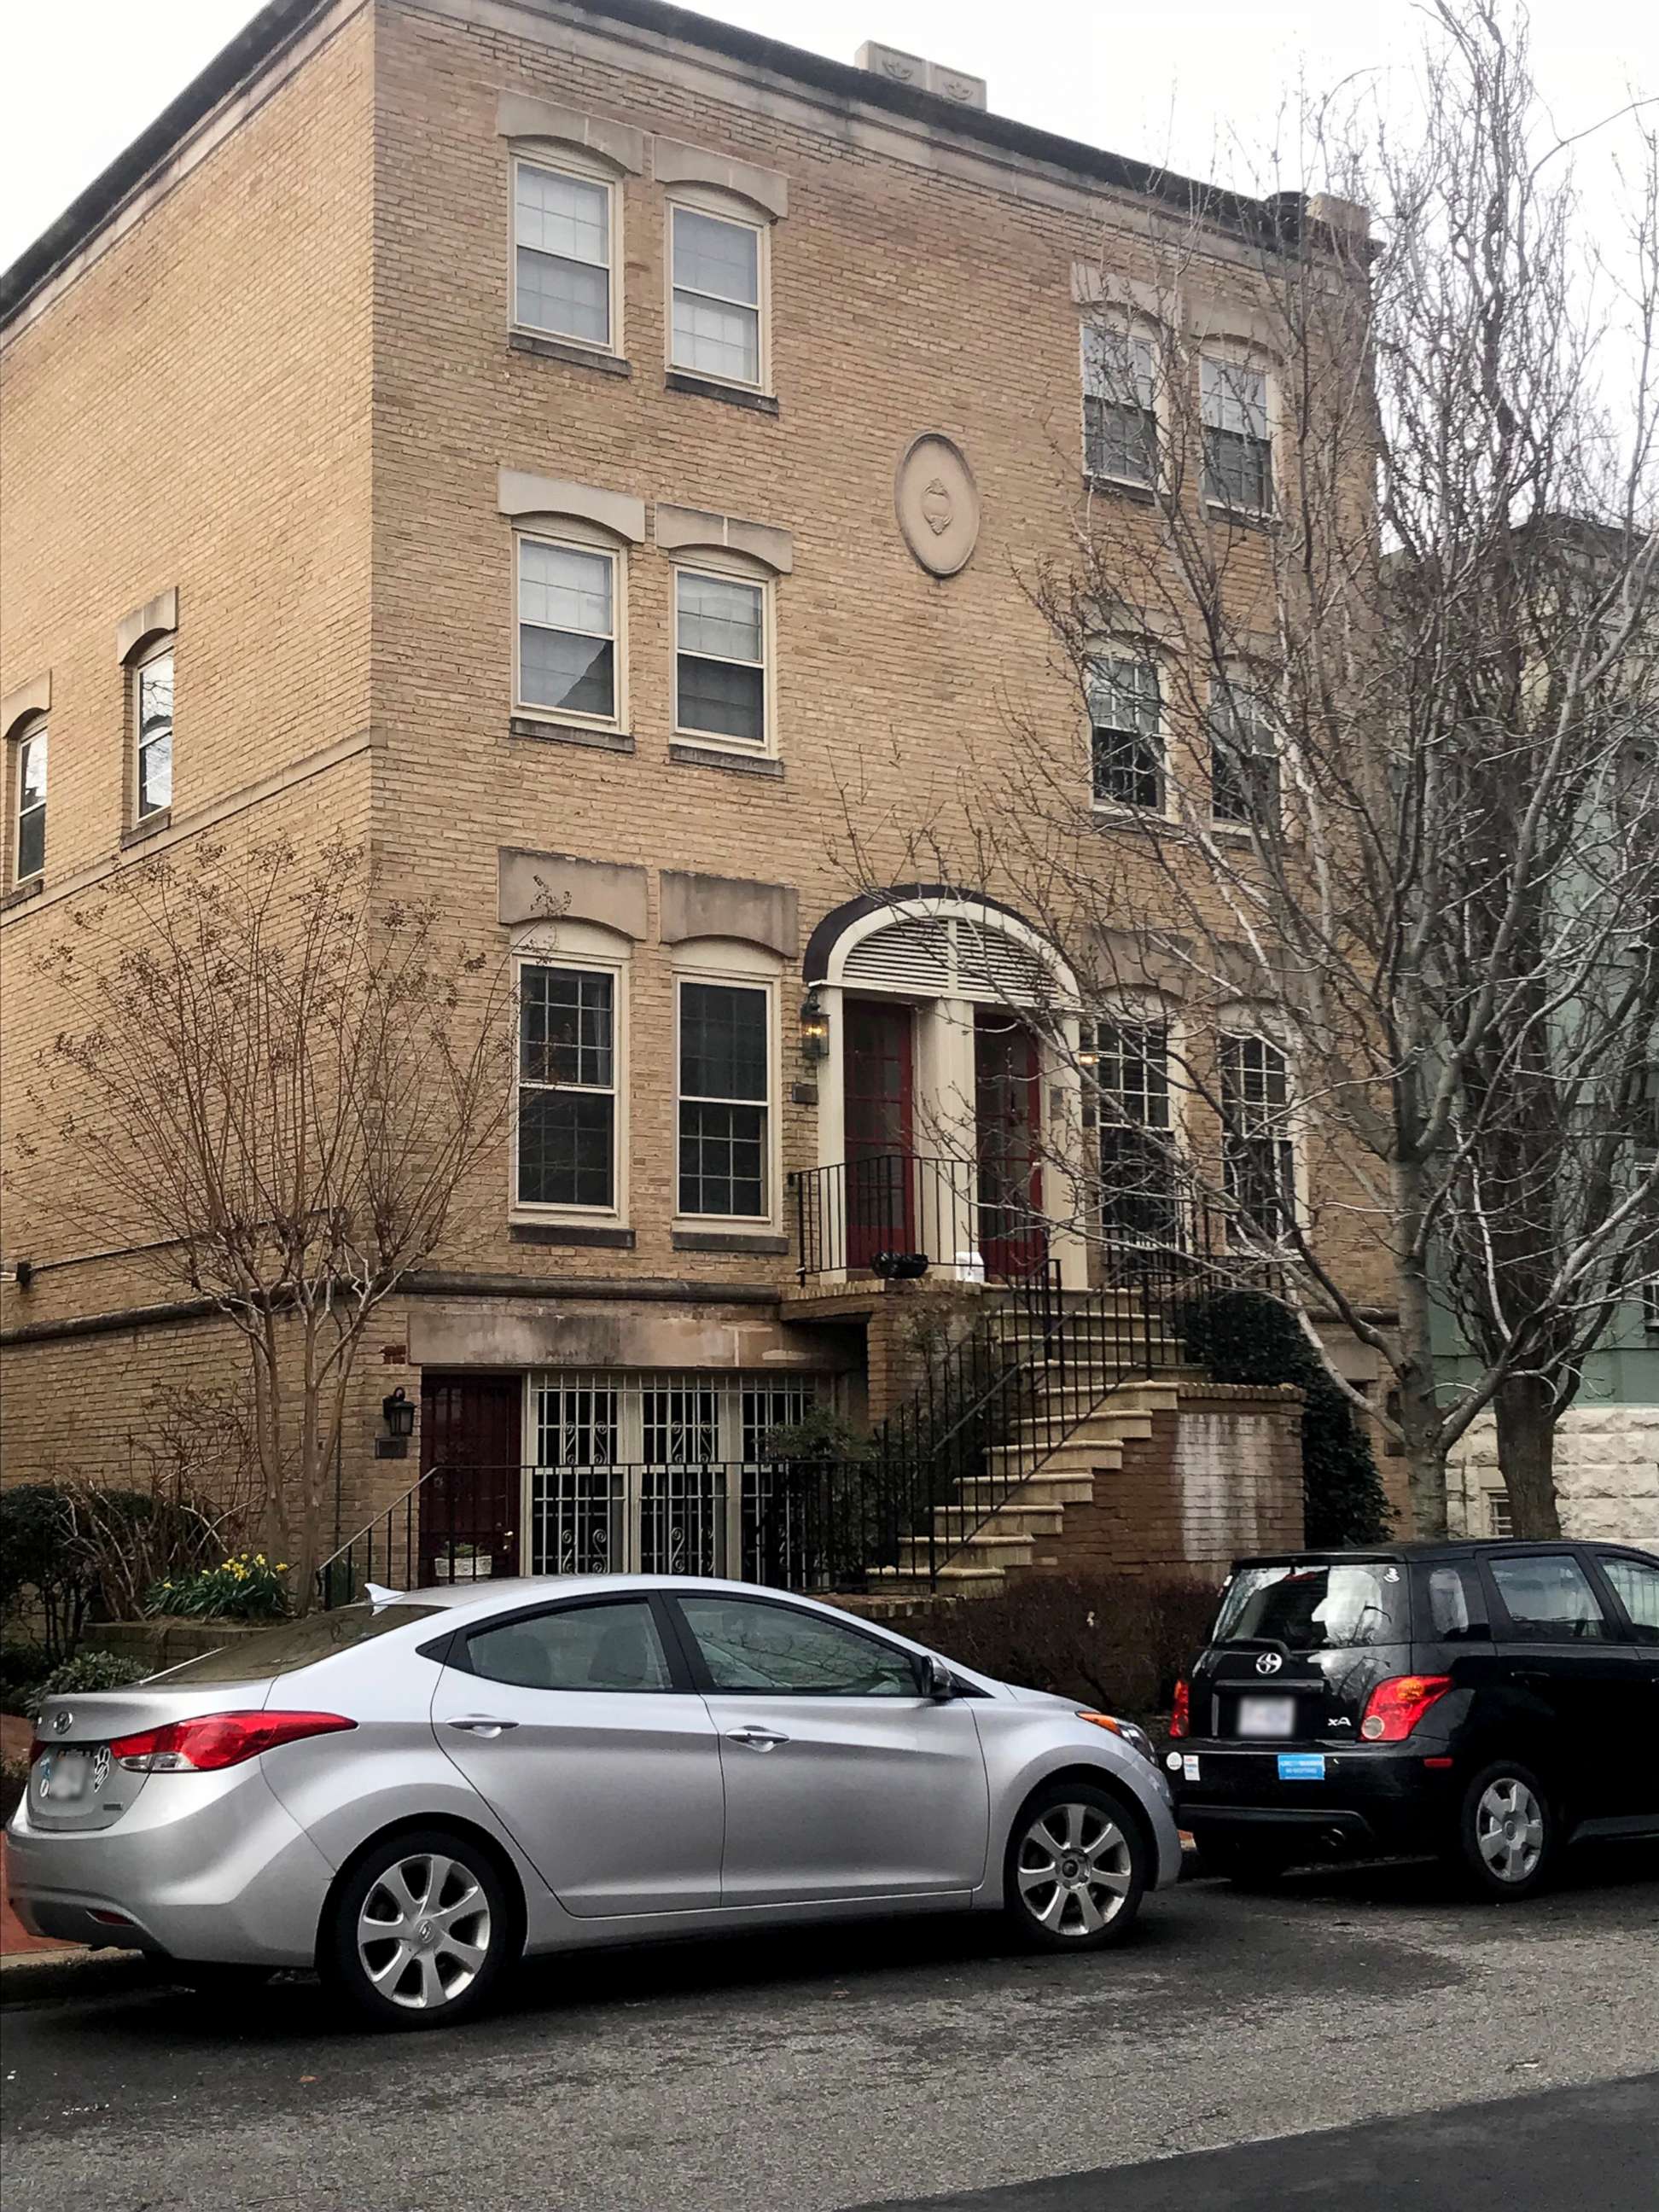 PHOTO: A three-story brick duplex one block from the U.S. Capitol where EPA Administrator, Scott Pruitt is said to have stayed. The building is co-owned by the wife of a top energy lobbyist, property records from 2017 show.